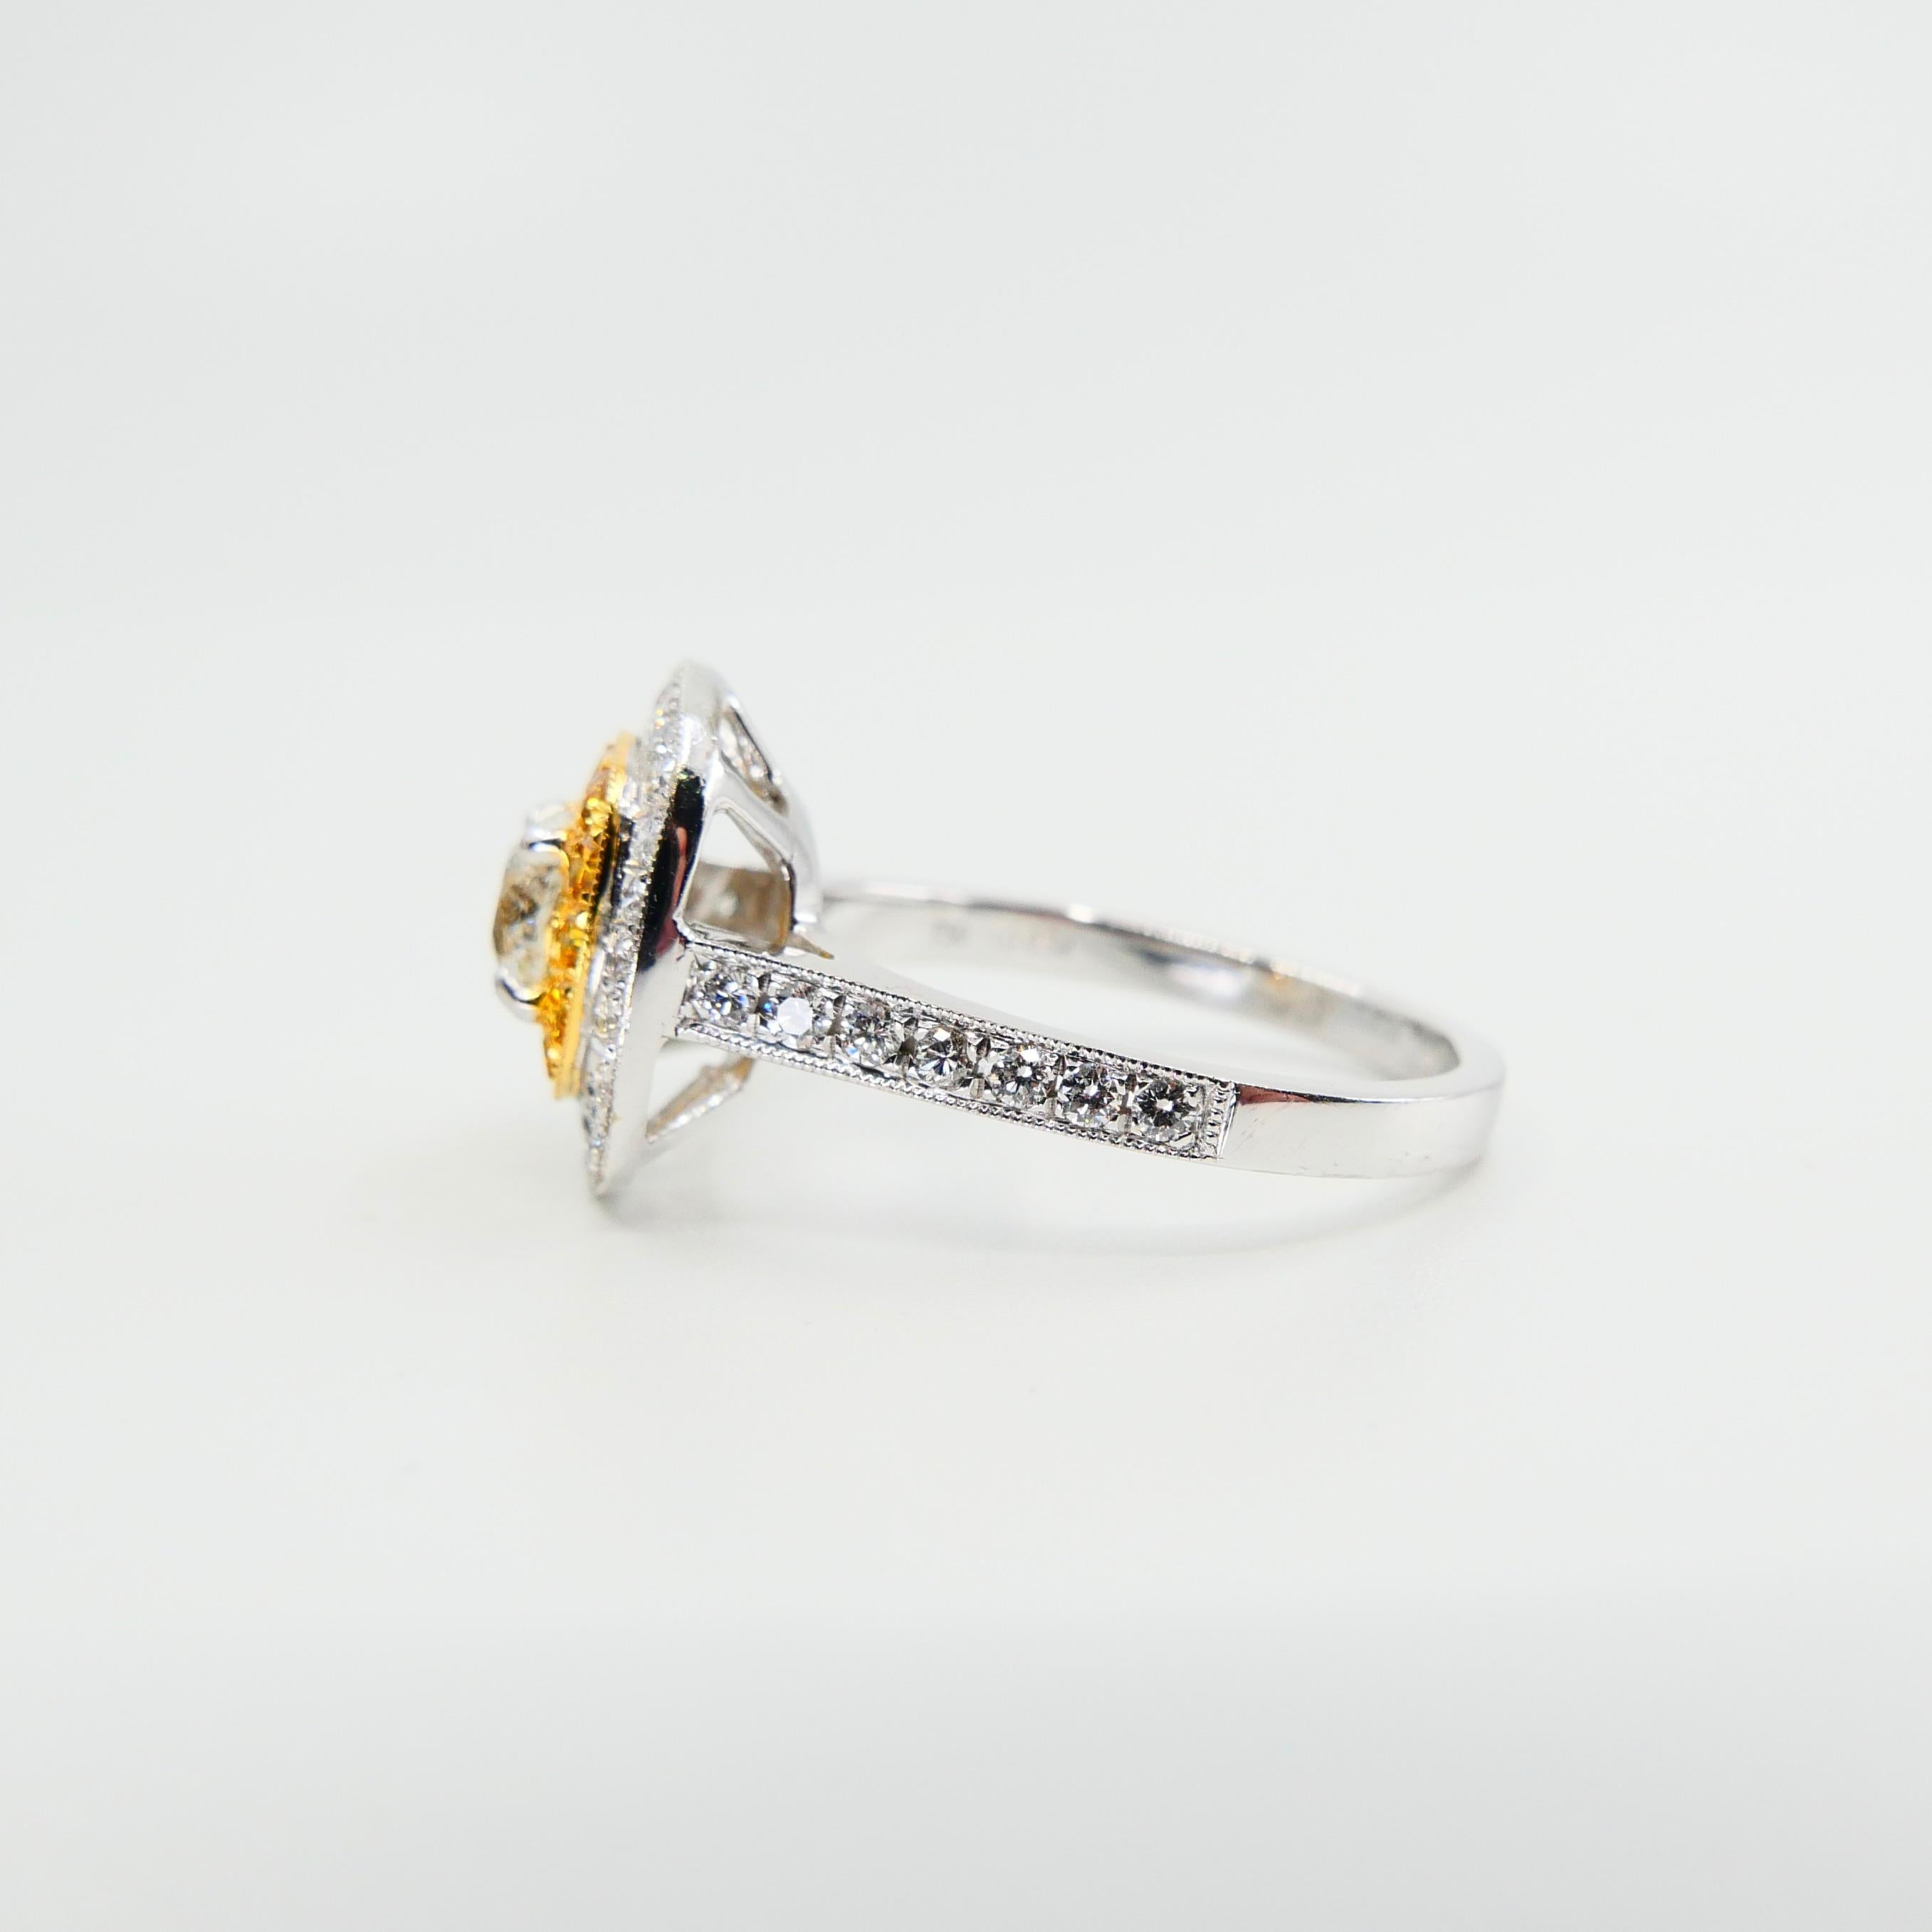 0.54 Cts Old Mine Cut & Fancy Vivid Yellow Diamond Cocktail Ring, 18K White Gold 2